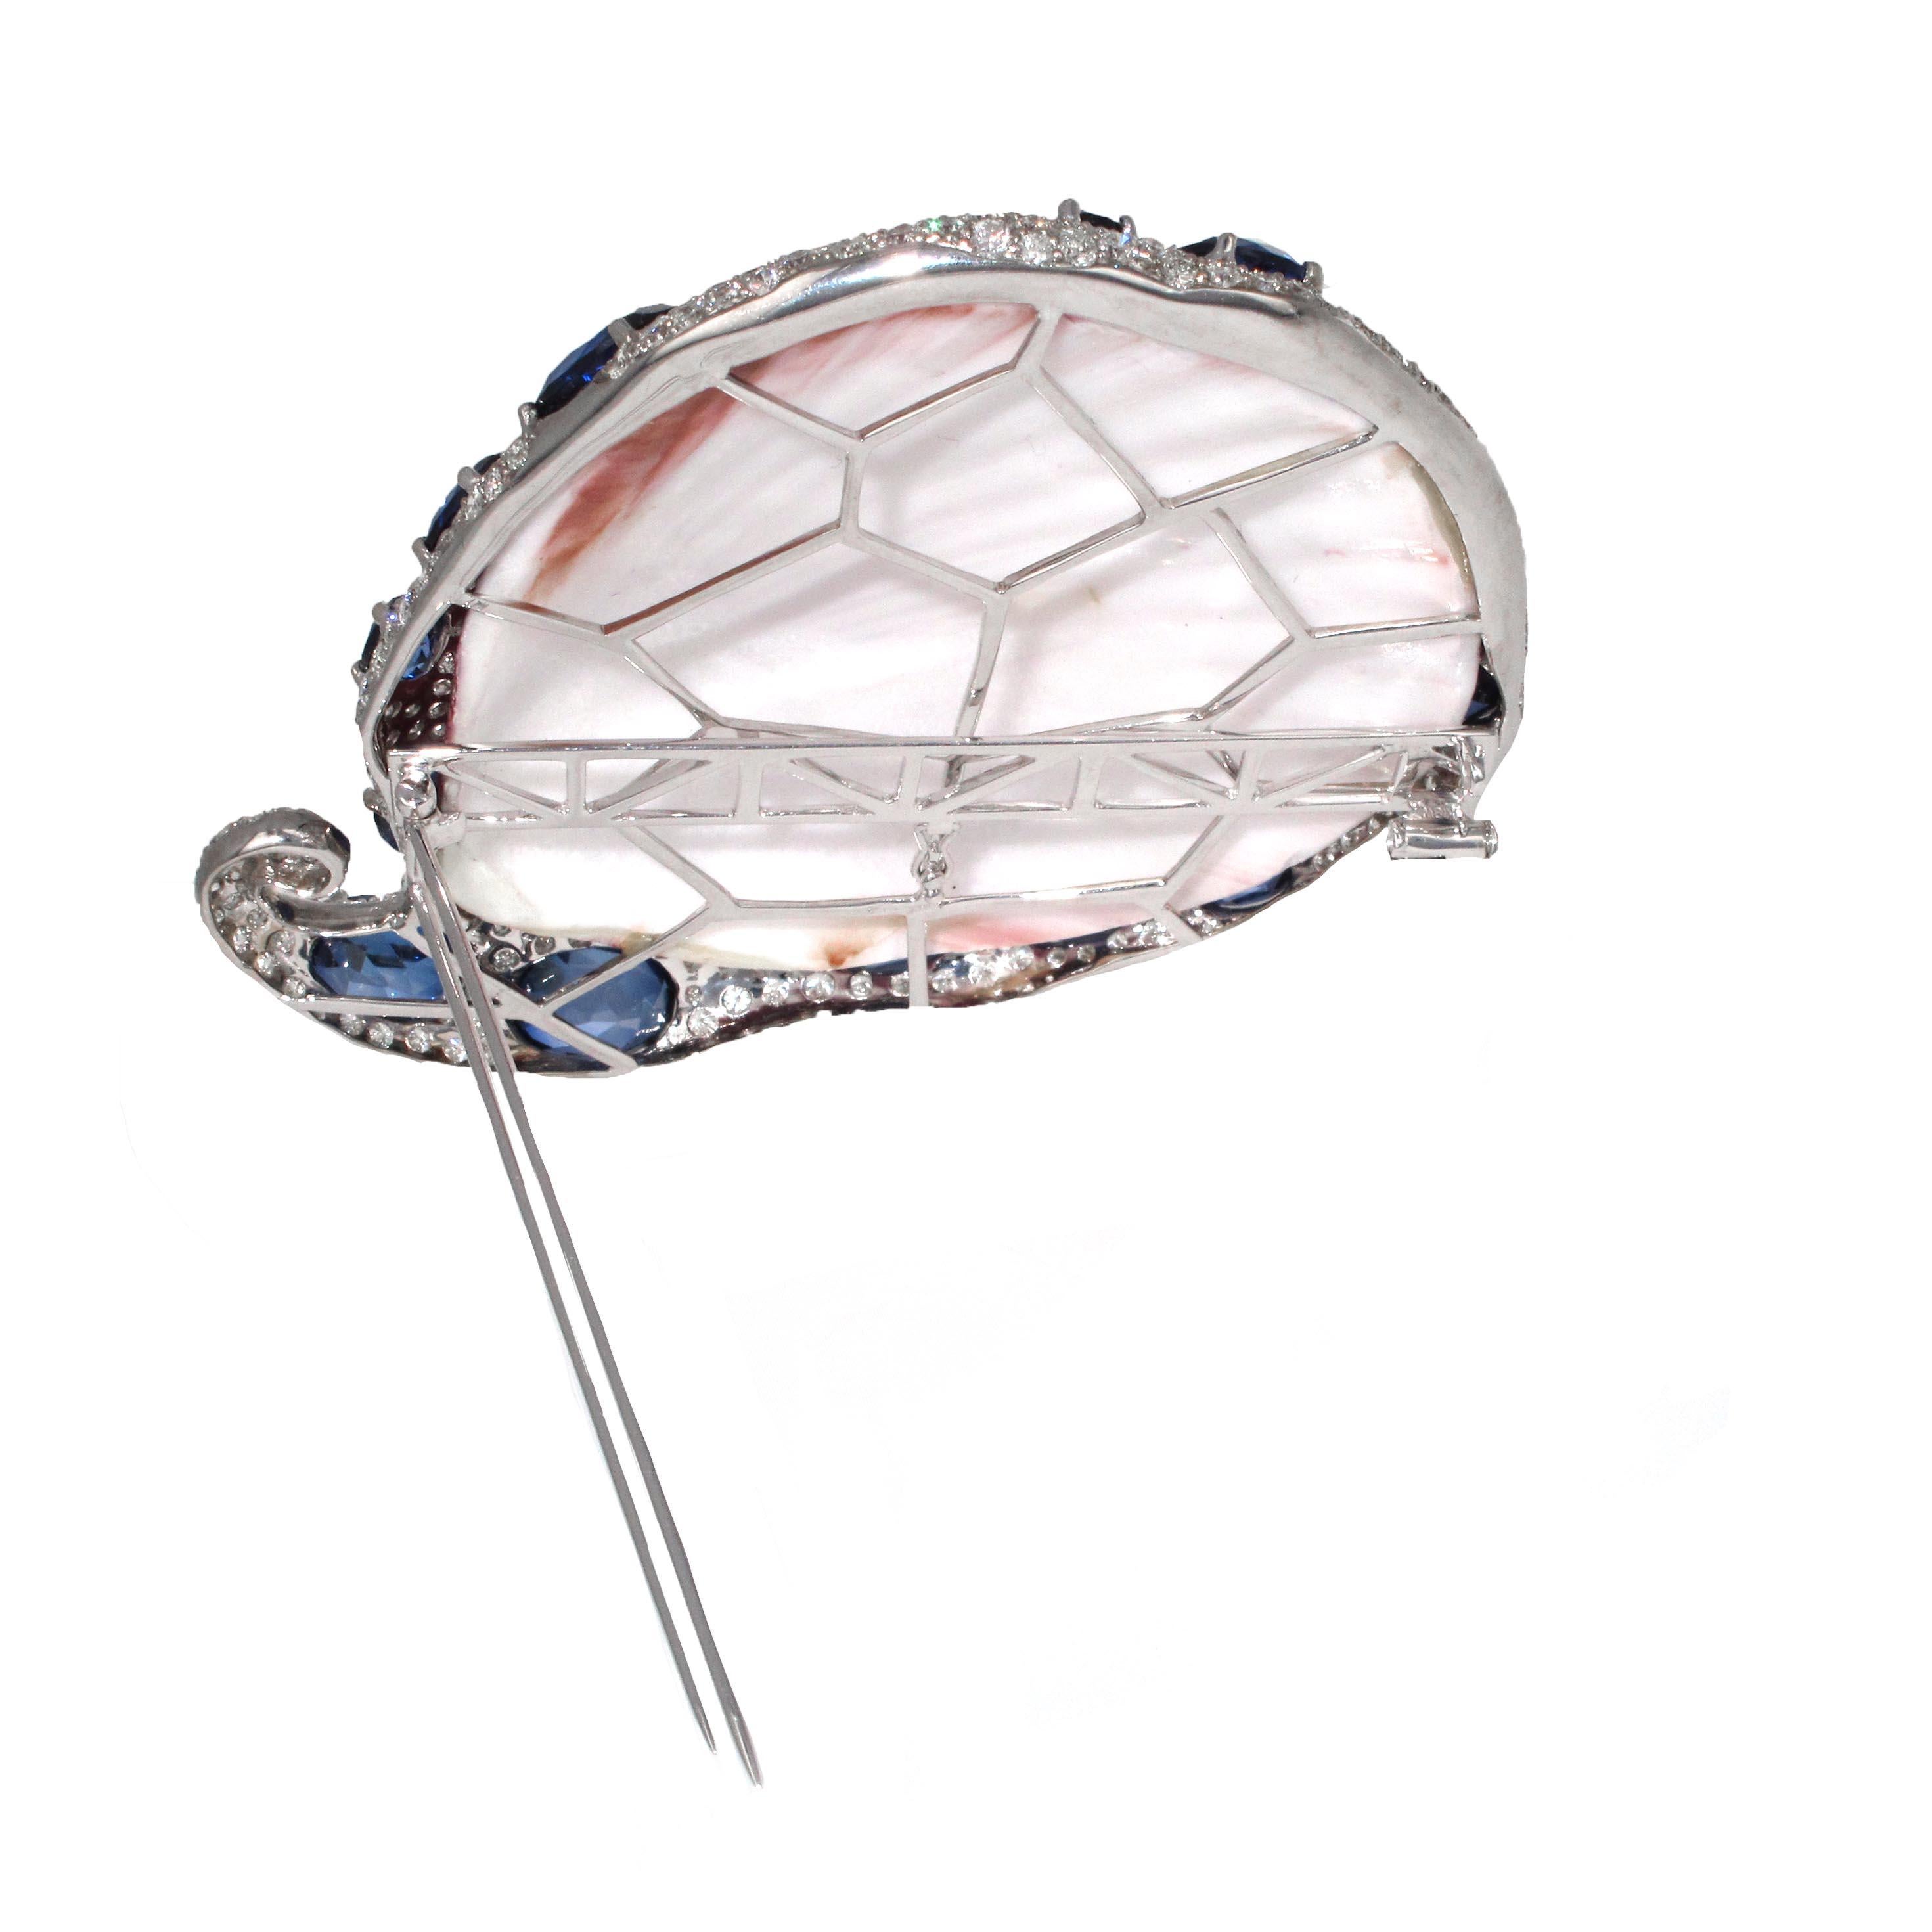 Women's or Men's Unique Diamond and Blue Quart Shell Brooch Pin